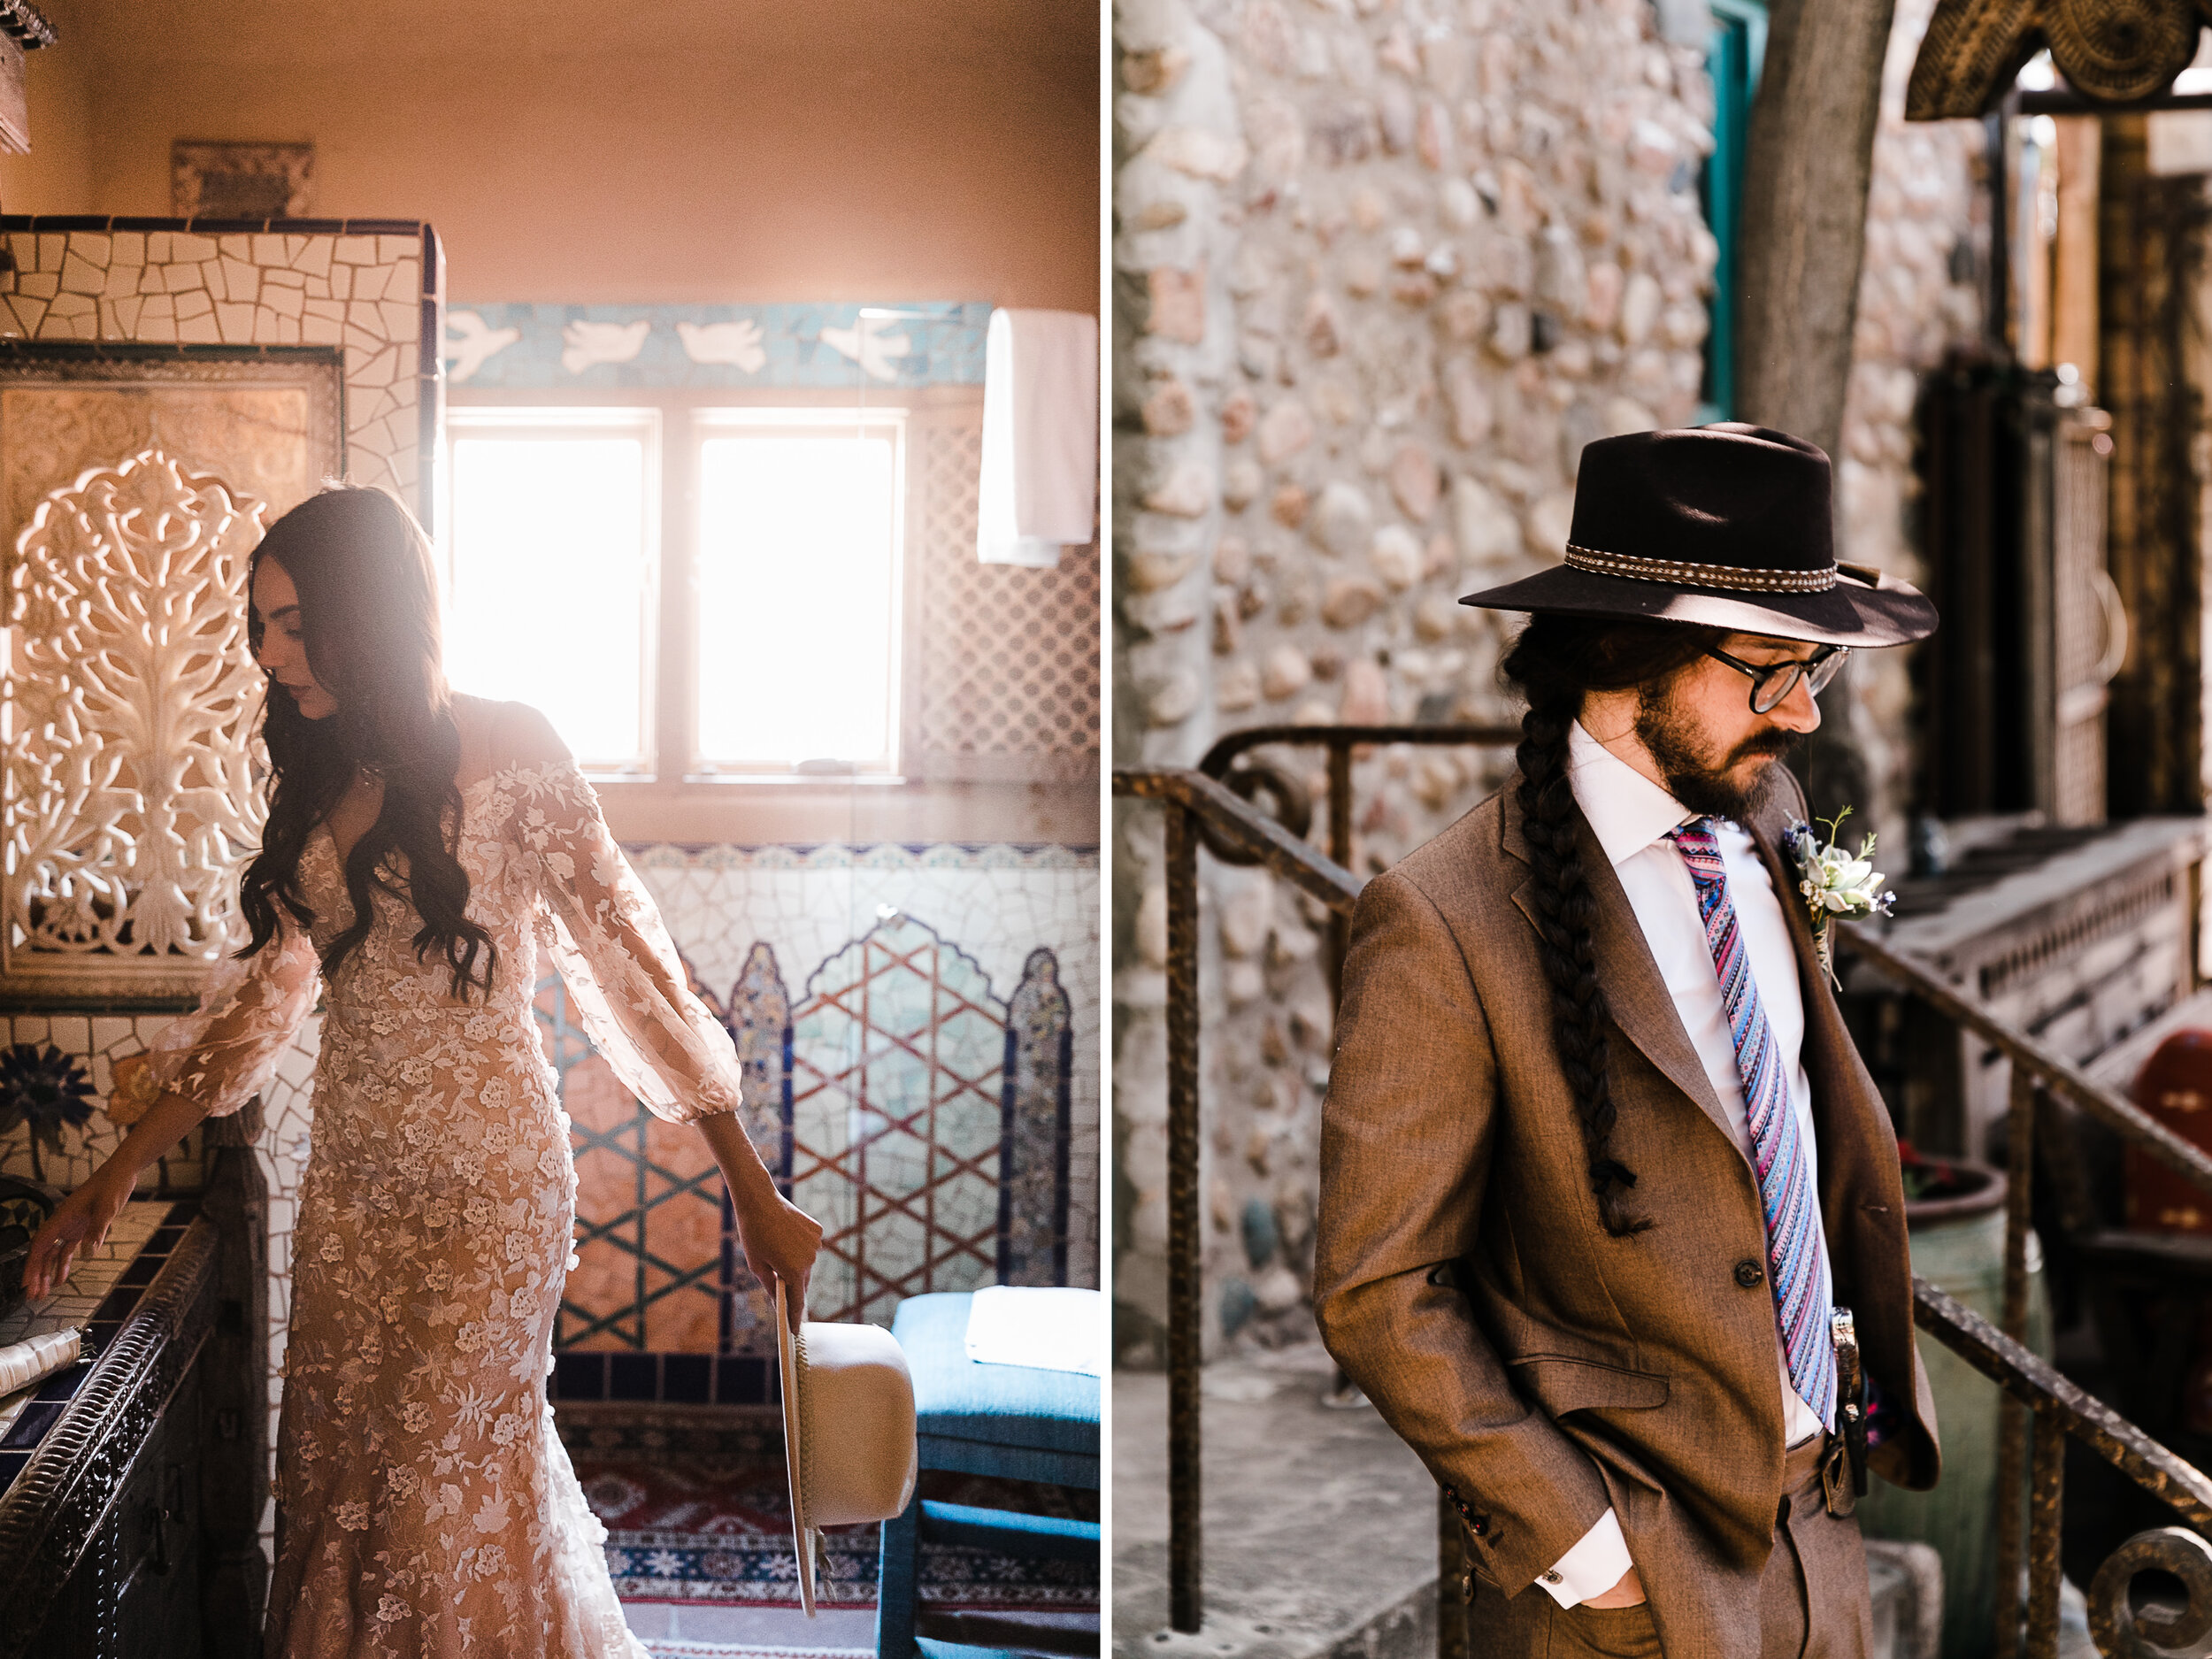 Rachel + Ryan’s Intimate Southwestern Wedding at Inn of the Five Graces in Santa Fe, New Mexico | Turquoise Bride | The Hearnes Adventure Photography